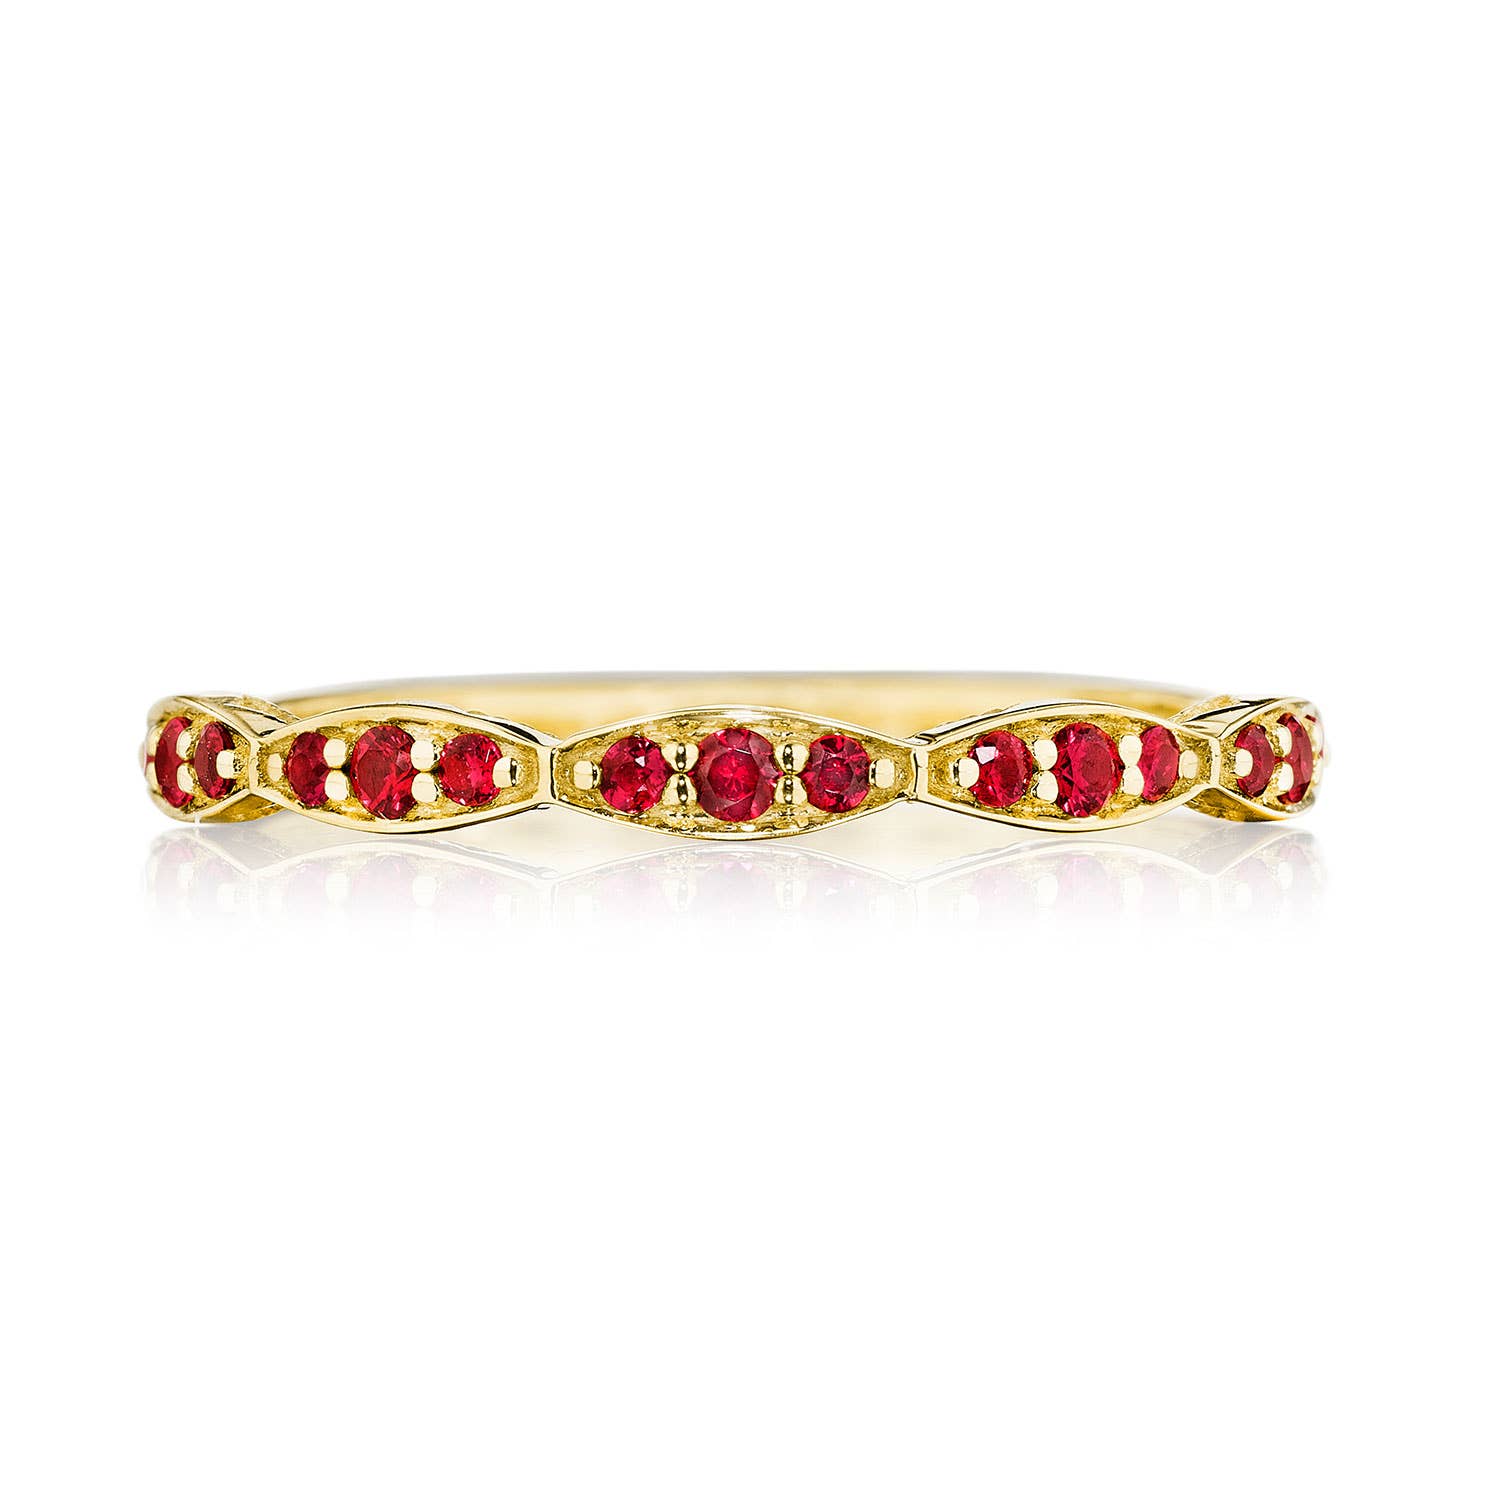 Marquise Design Wedding Band with Ruby